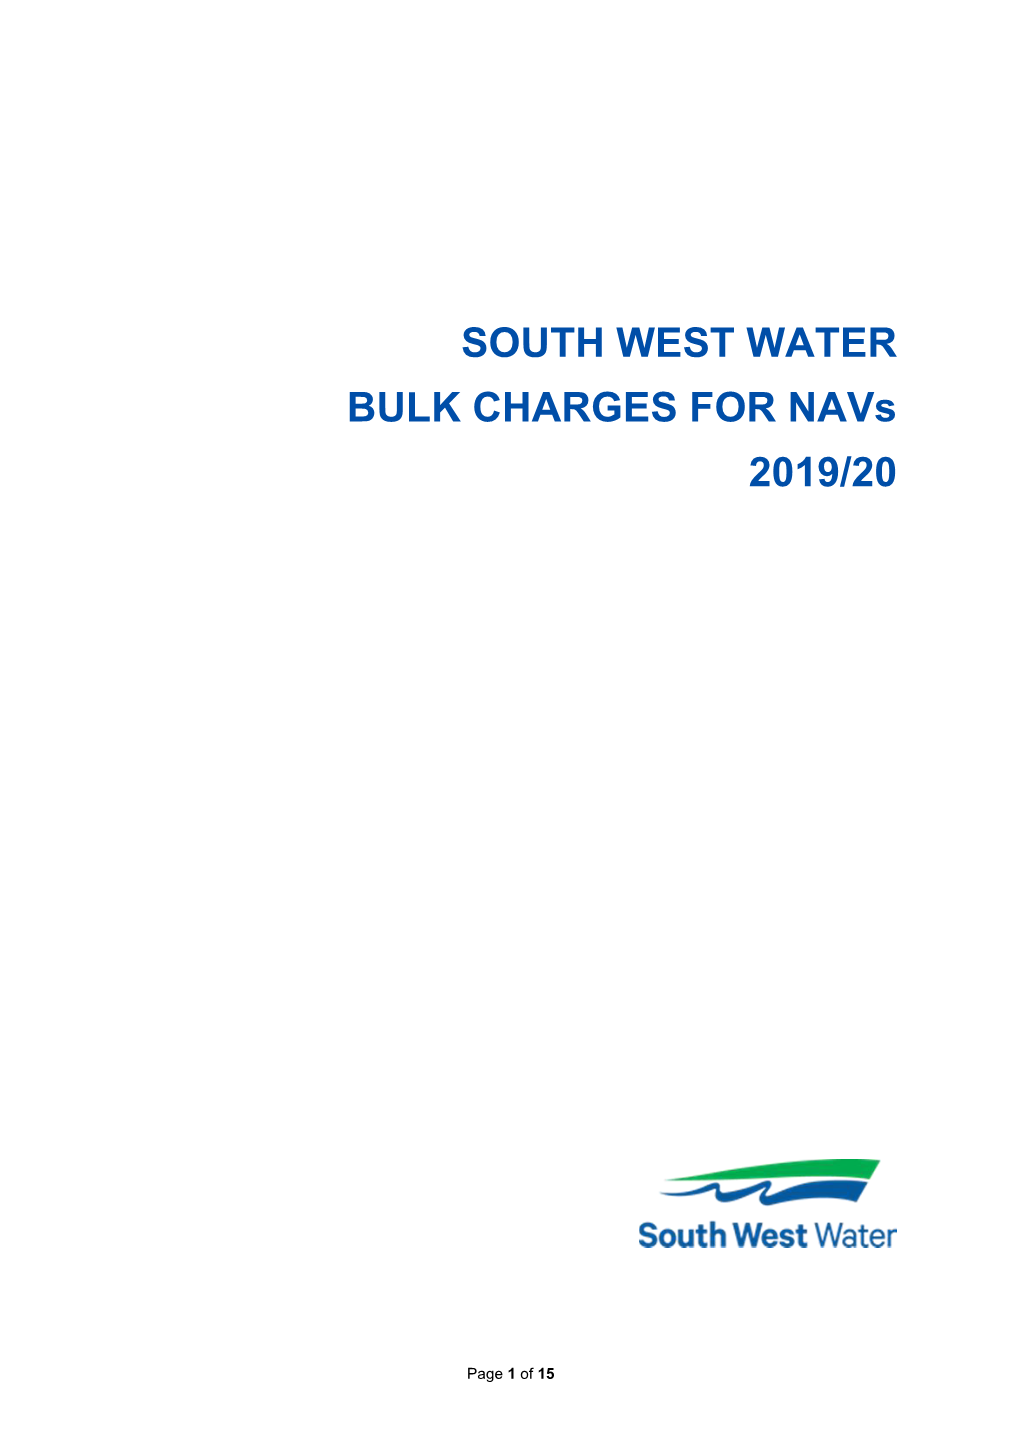 SOUTH WEST WATER BULK CHARGES for Navs 2019/20